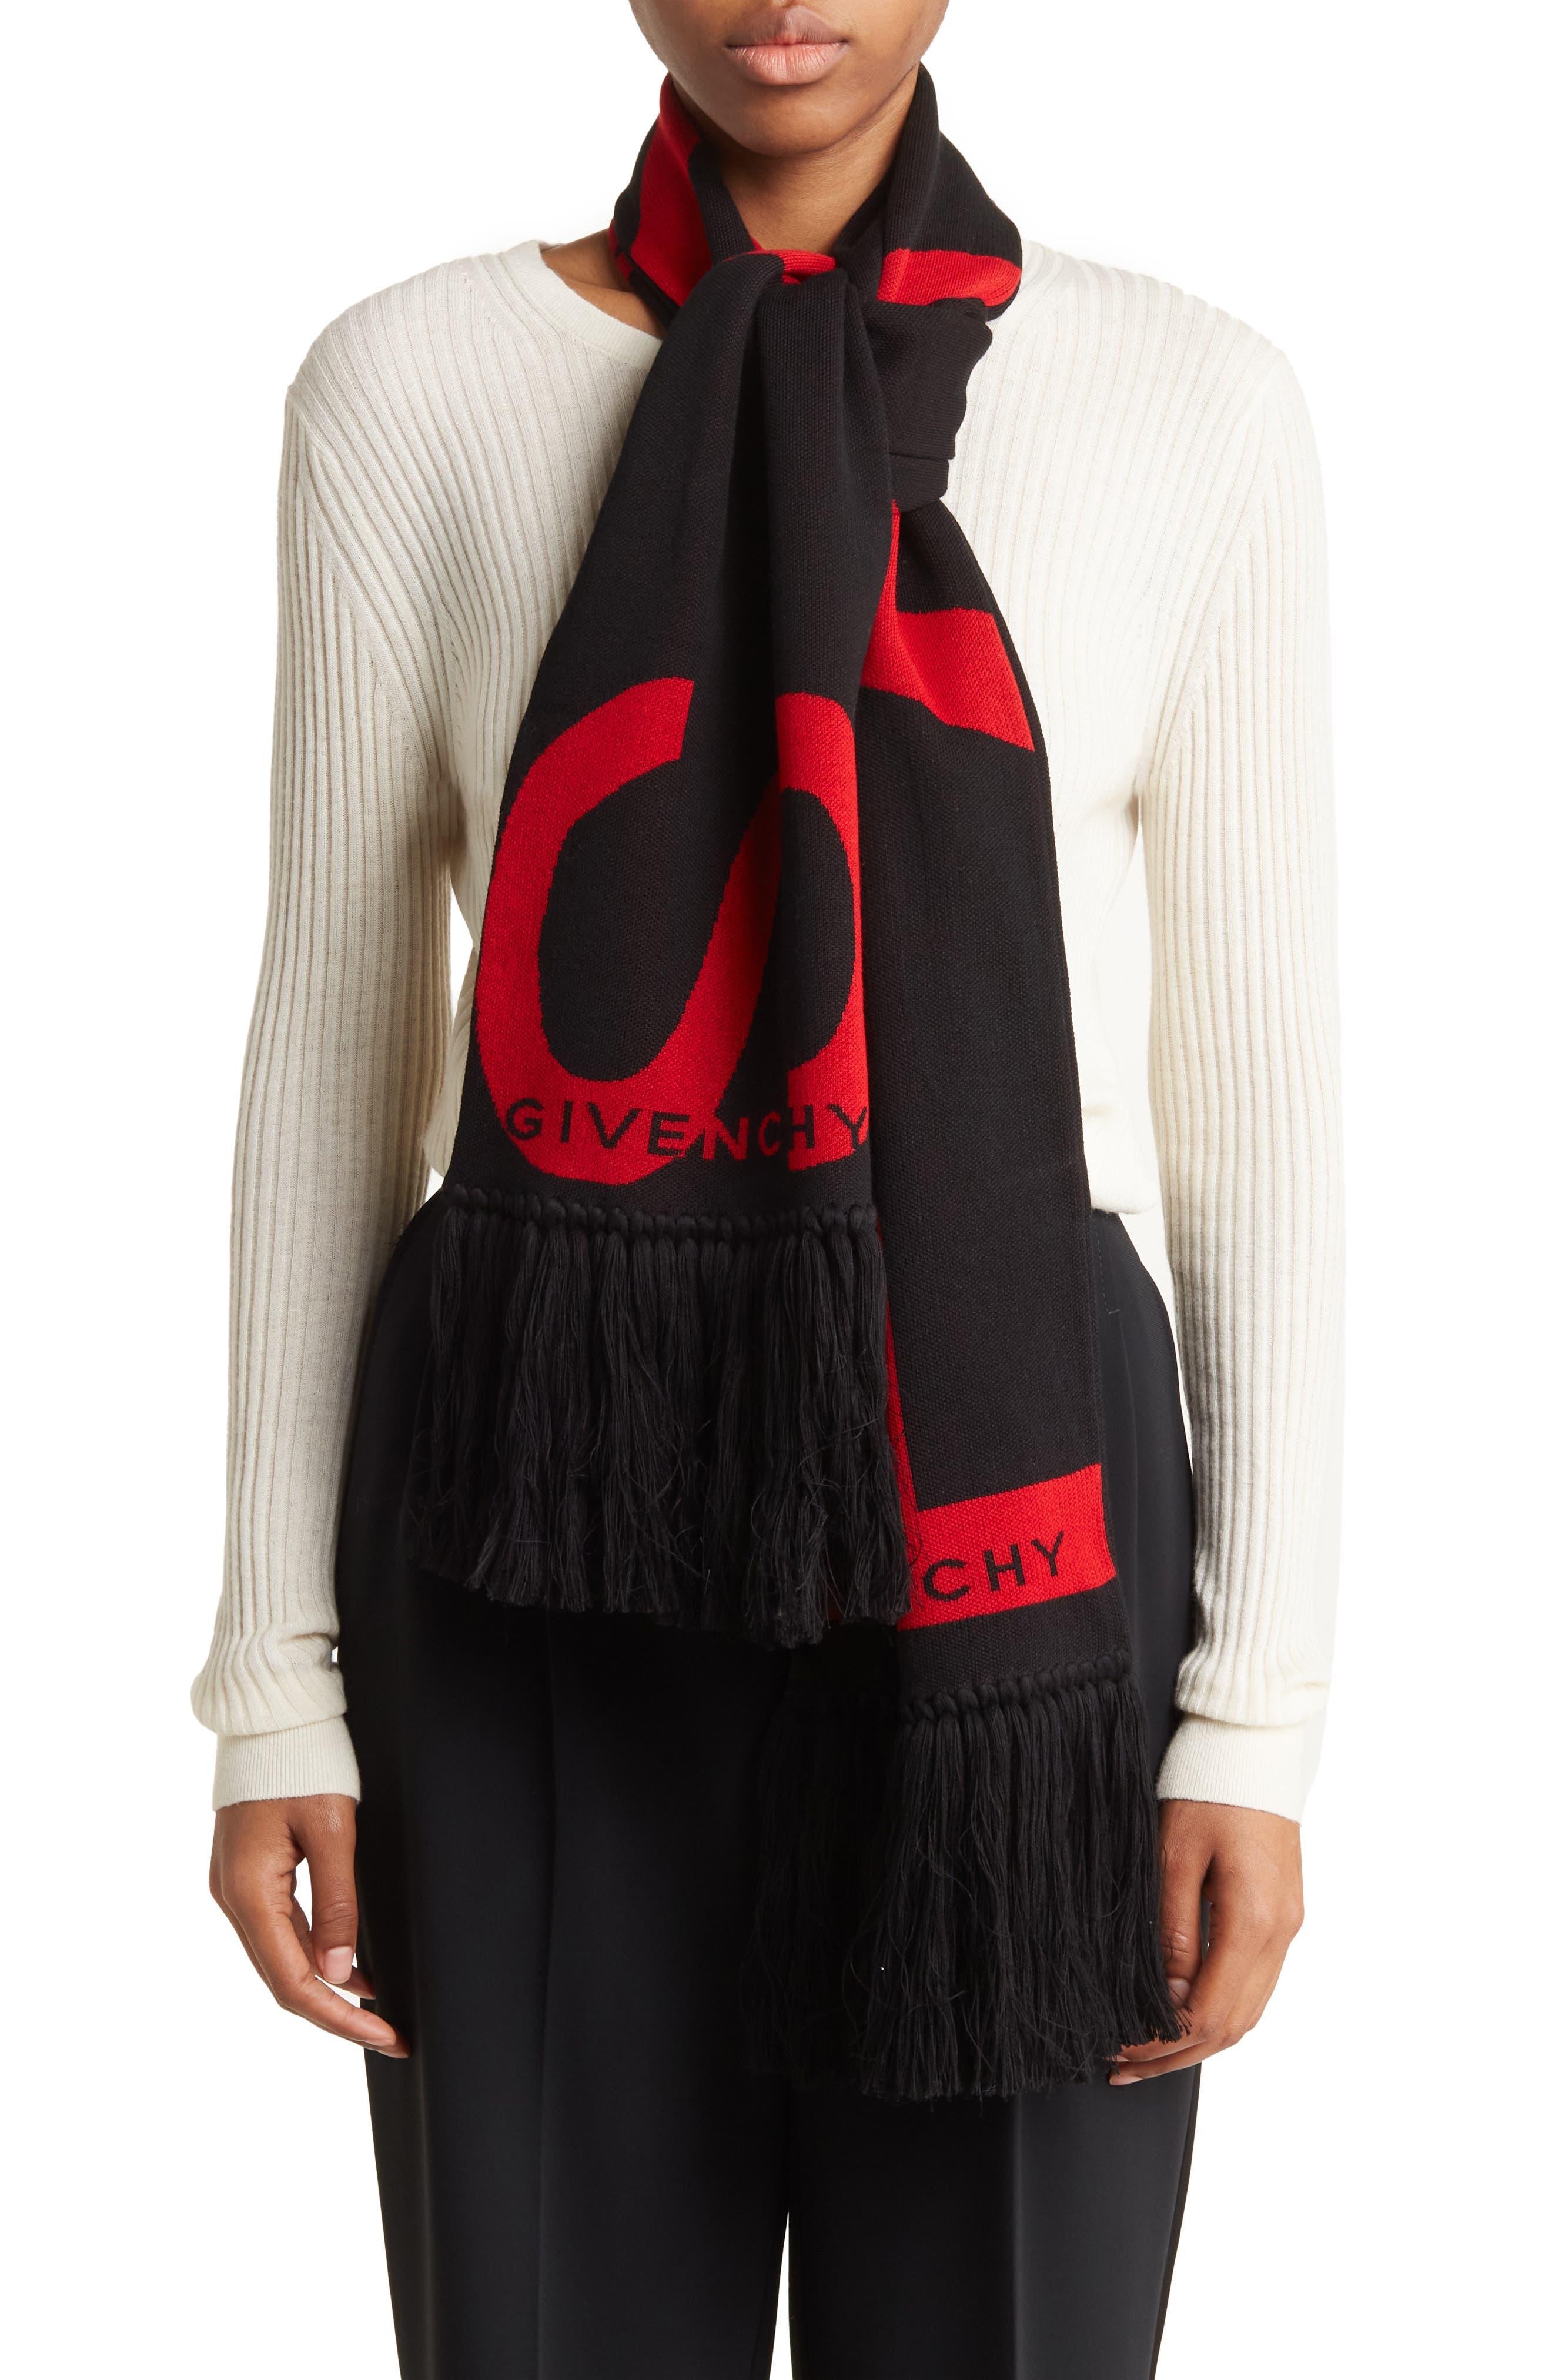 Givenchy Logo Scarf In Black Red At Nordstrom Rack | Lyst